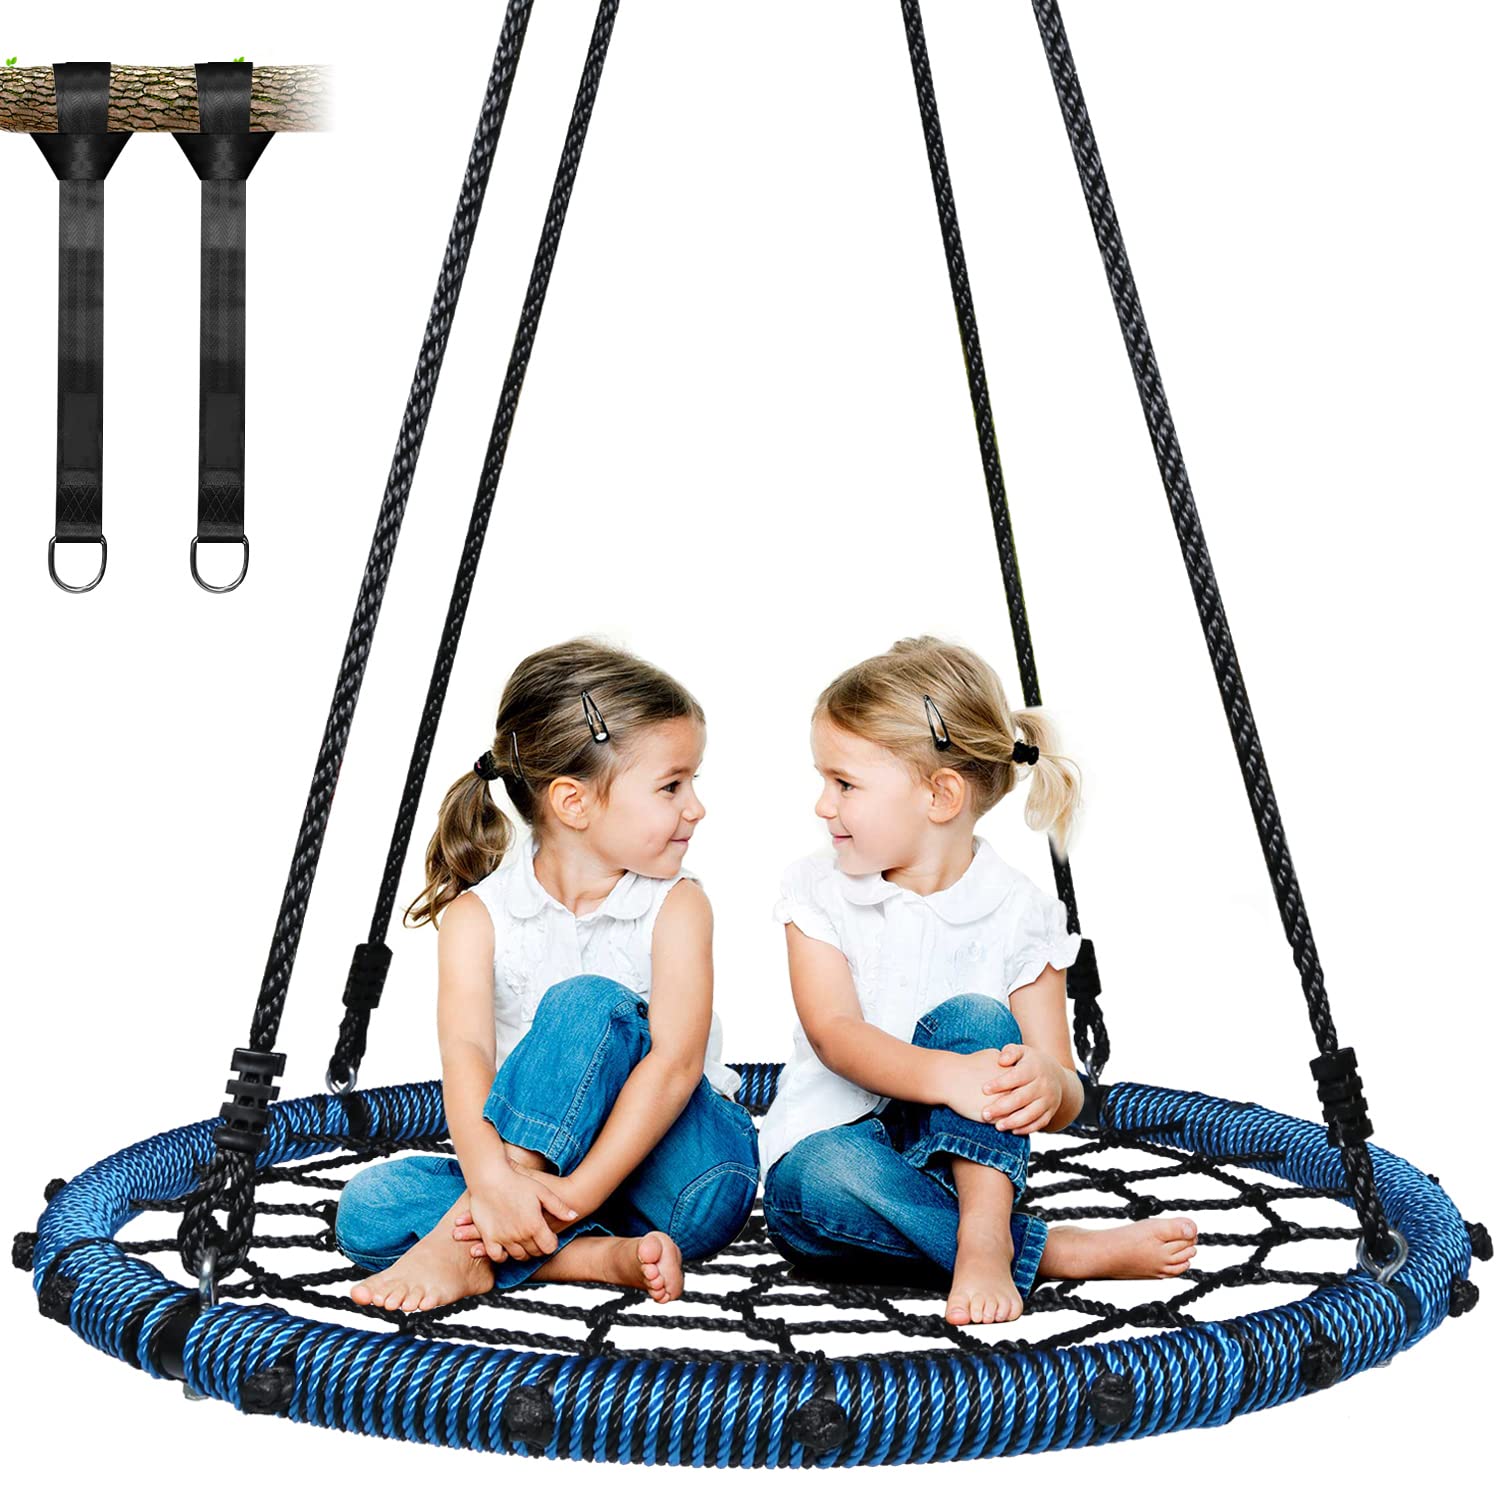 Trekassy Spider Web Swing 40 inch for Tree Kids with Steel Frame and 2 Hanging Straps